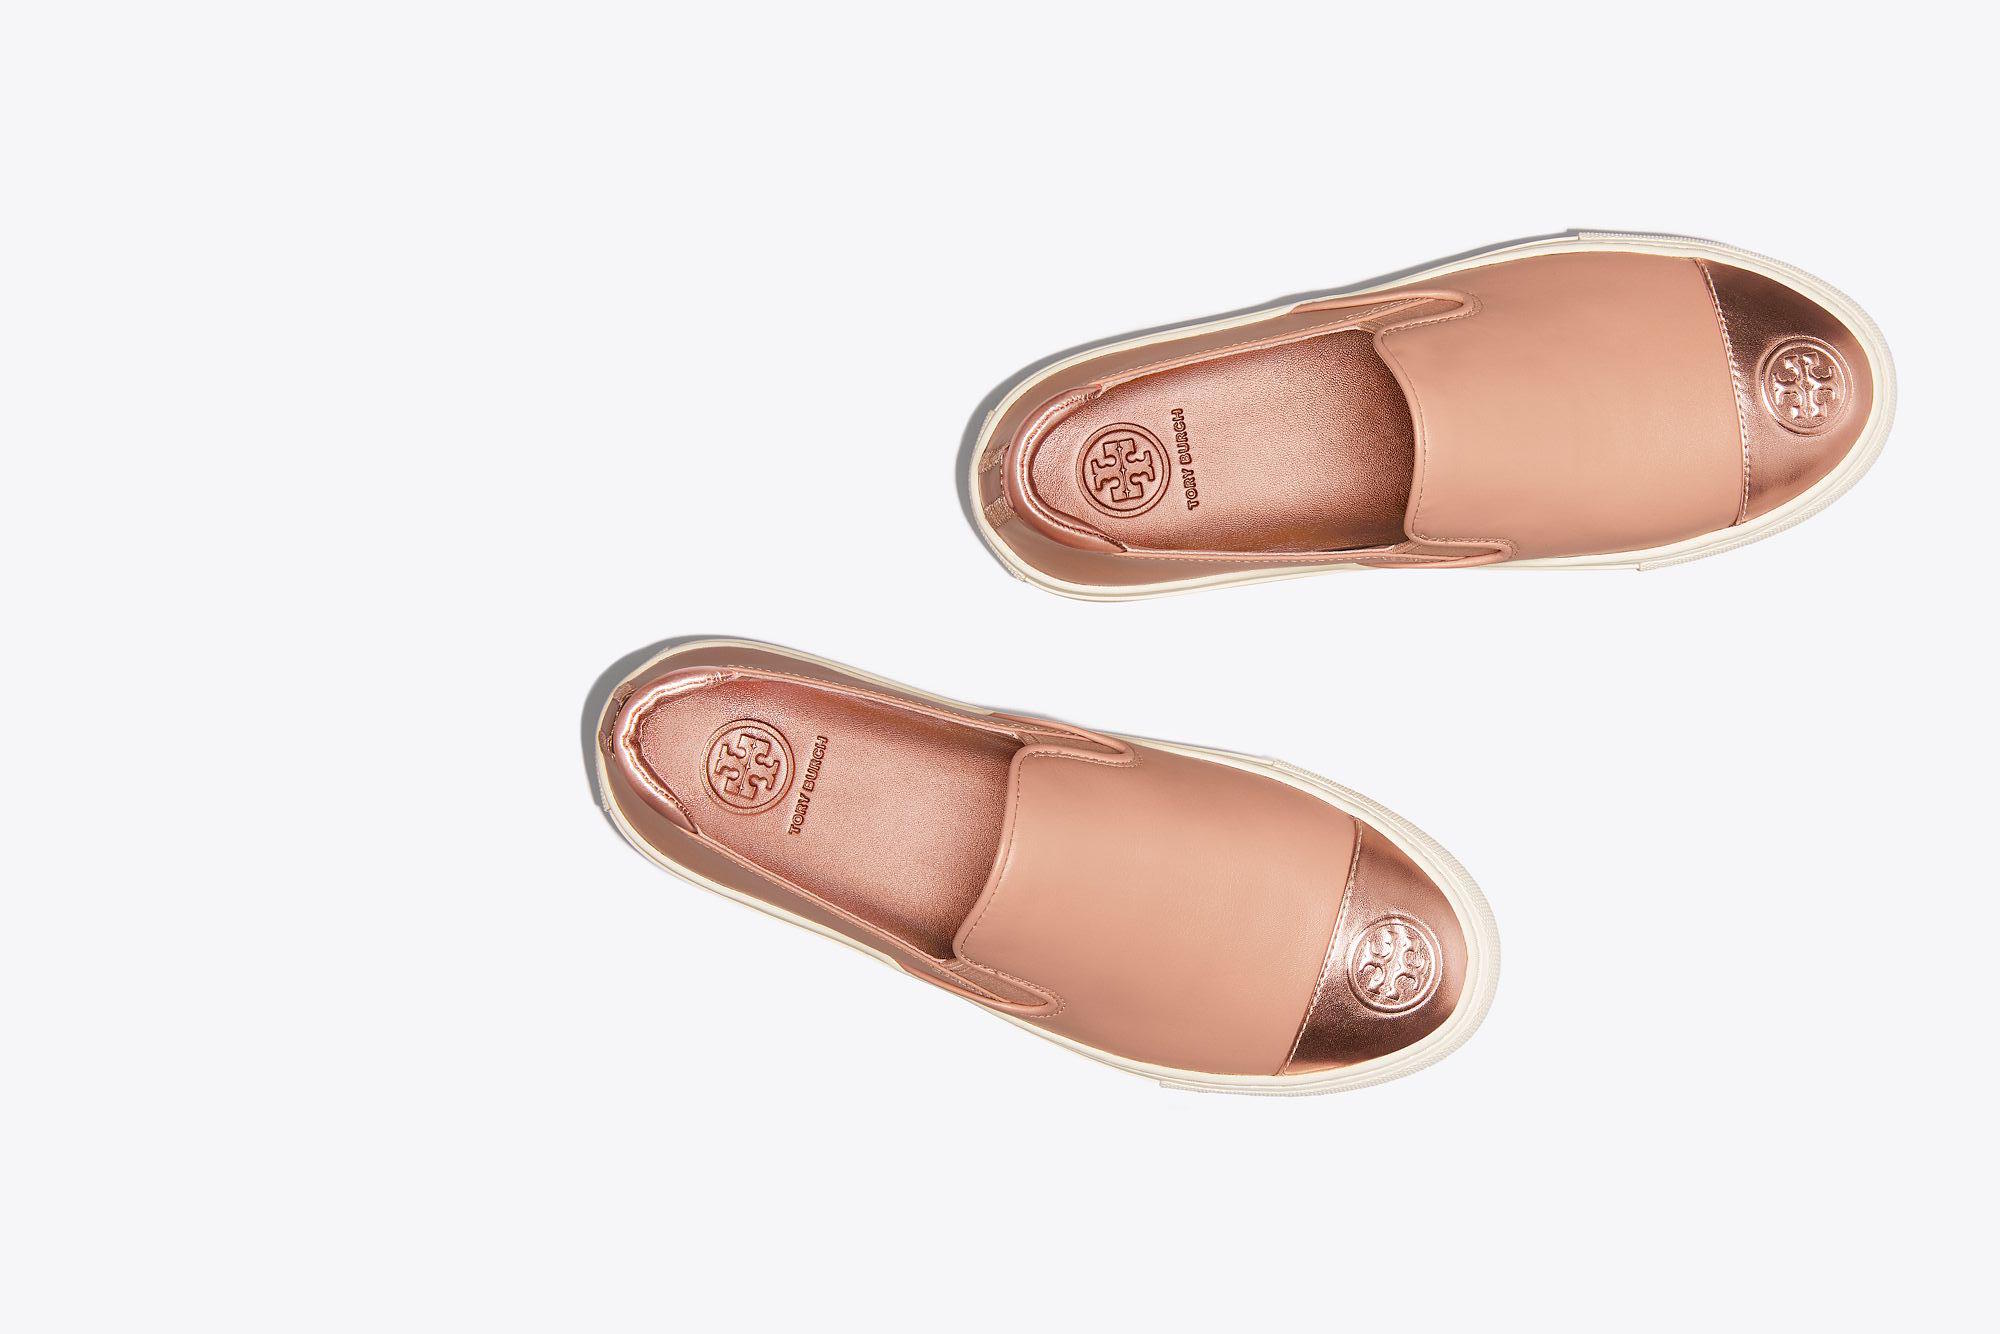 Tory Burch Sneakers Are on Major Sale 